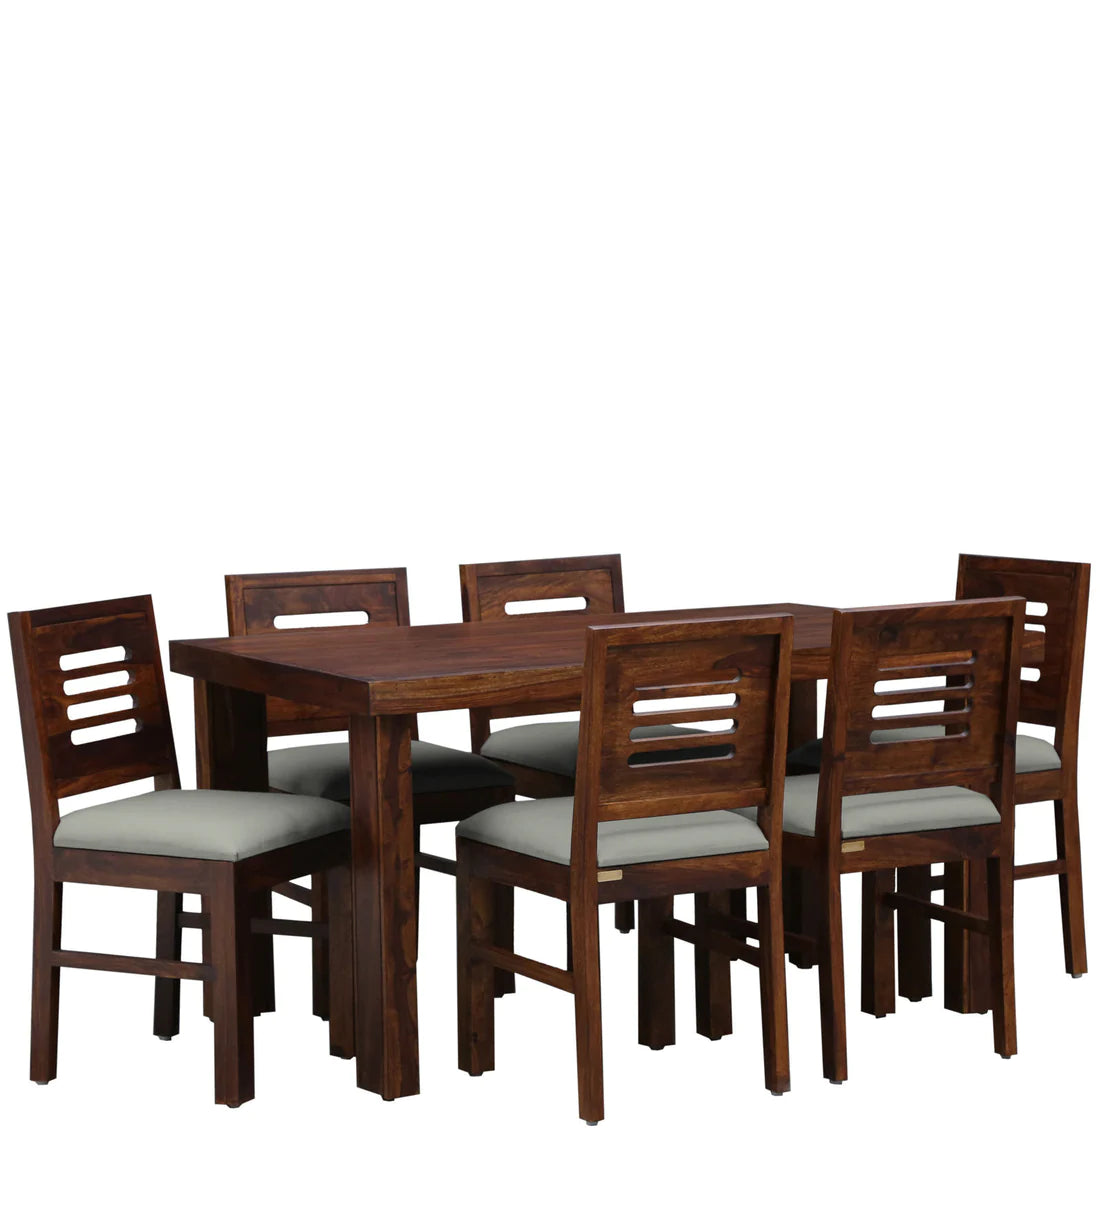 Acro Wooden 6 Seater Cushioned Dining Set For Dining Room - Rajwada Furnish